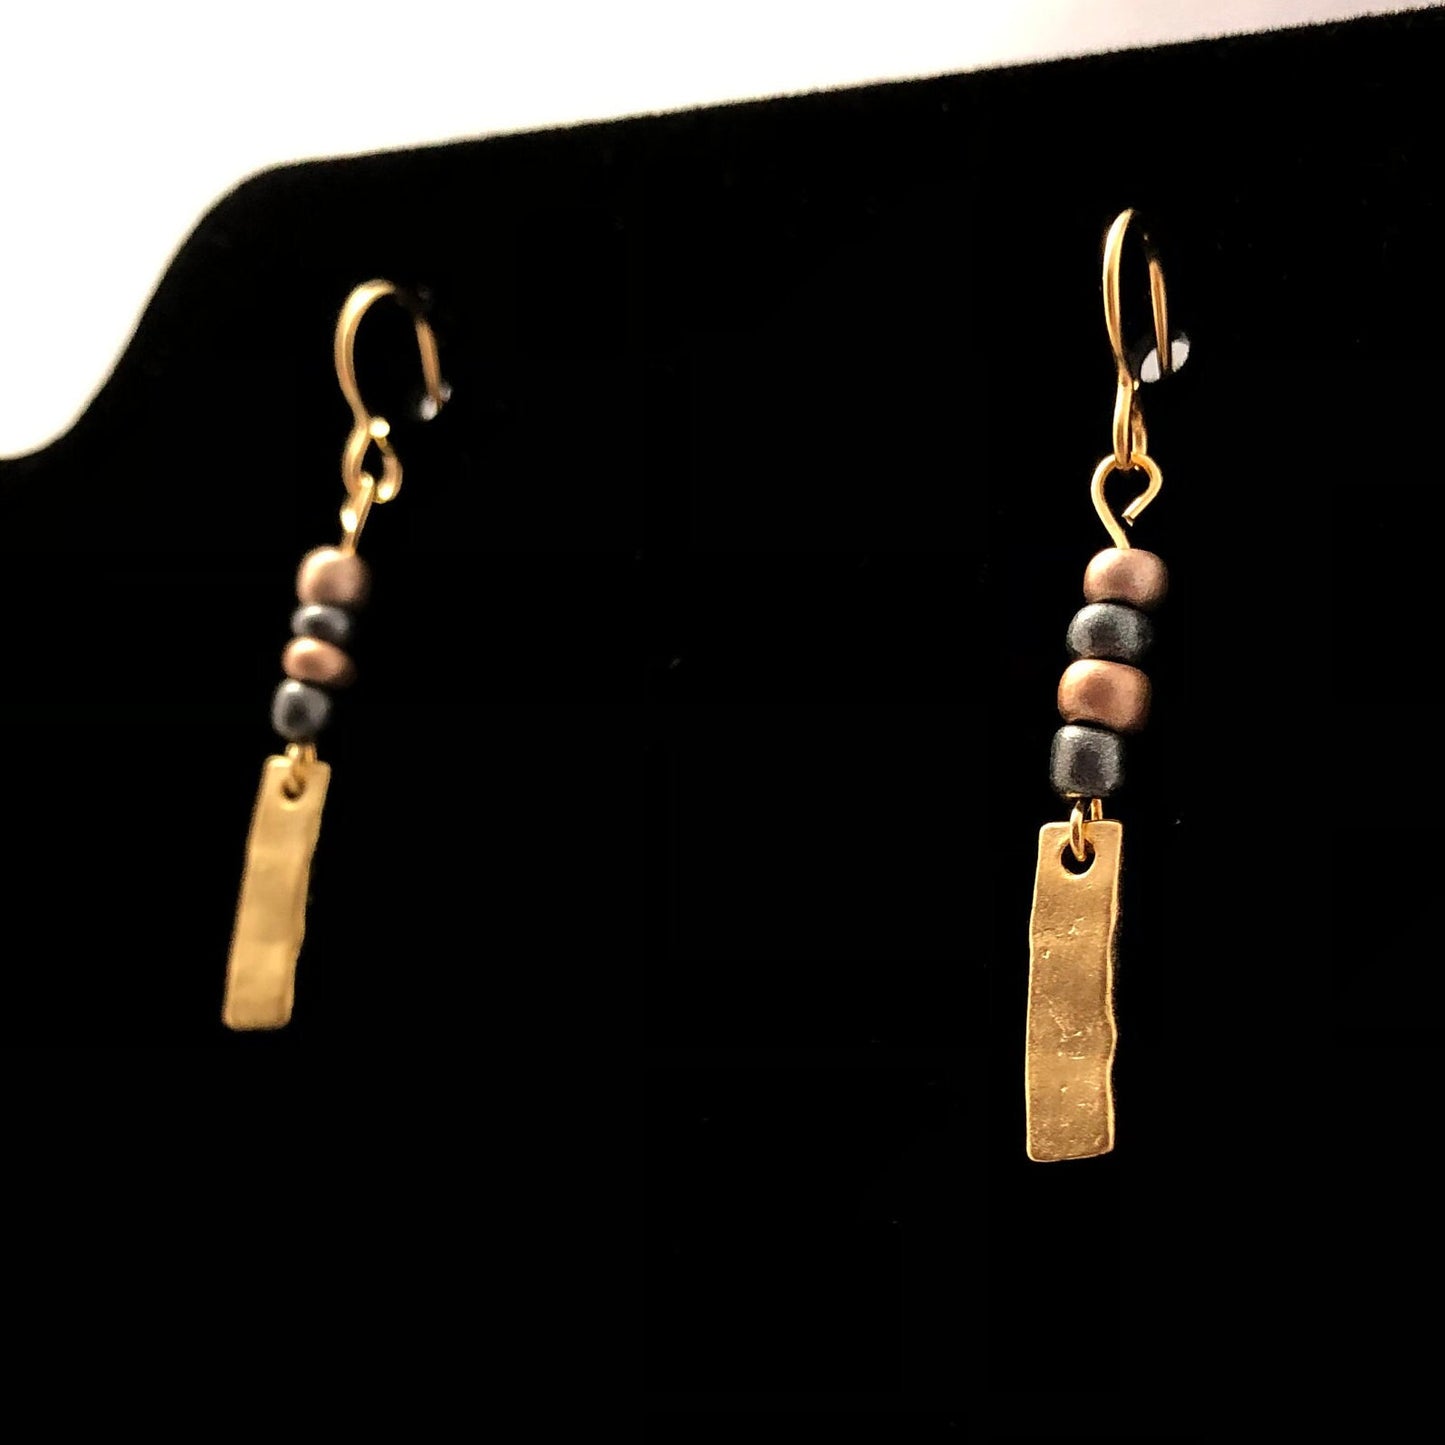 Mixed media dangling earrings made with slender brass charm below combination of 4 glass & beads between them attached to brass hook